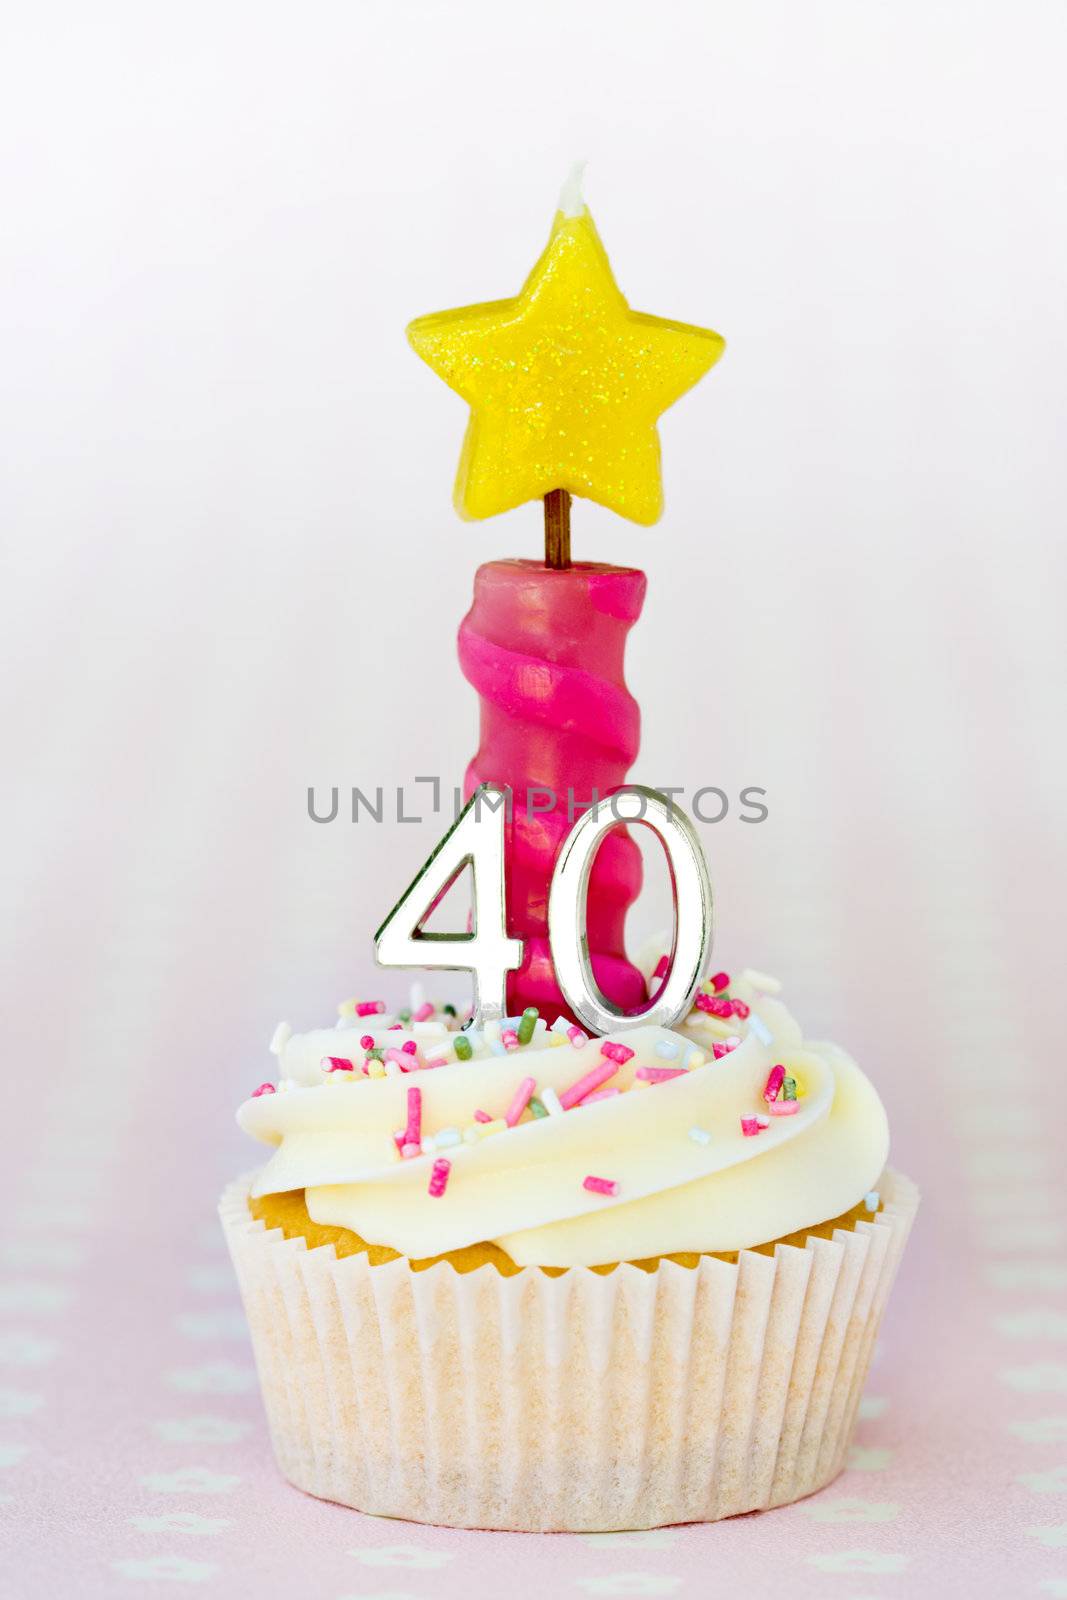 Mini fortieth birthday cake decorated with a single candle